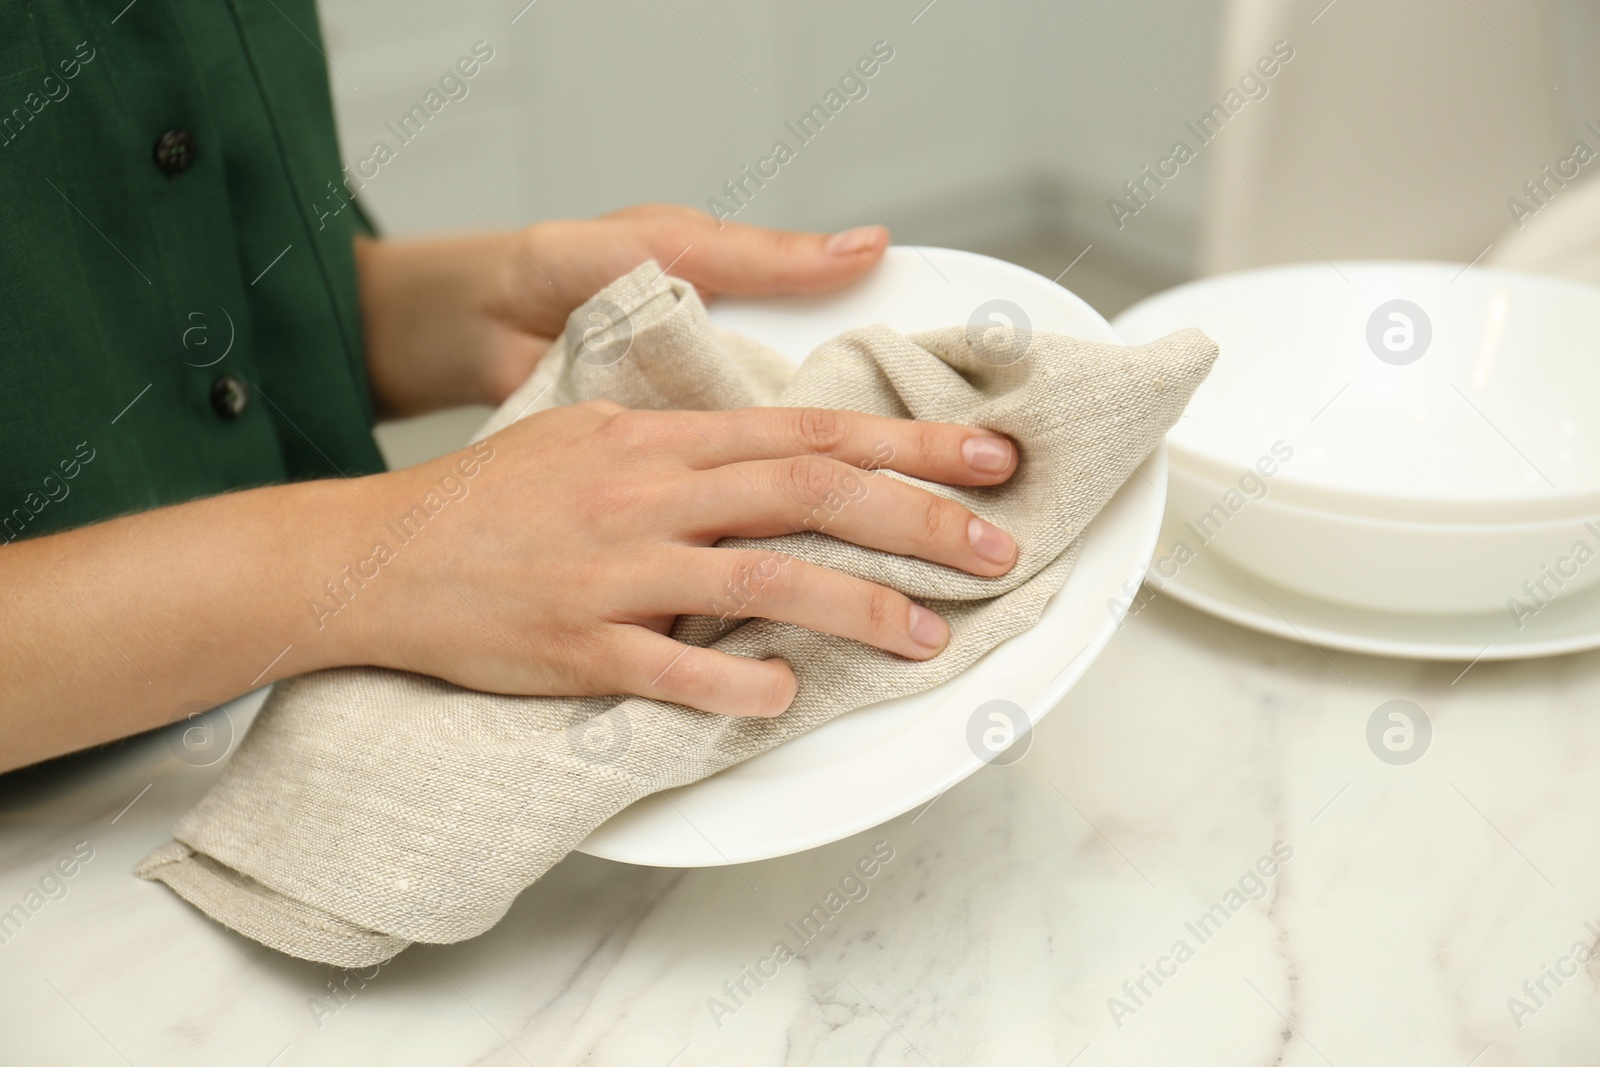 Photo of Woman wiping plate with towel in kitchen, closeup